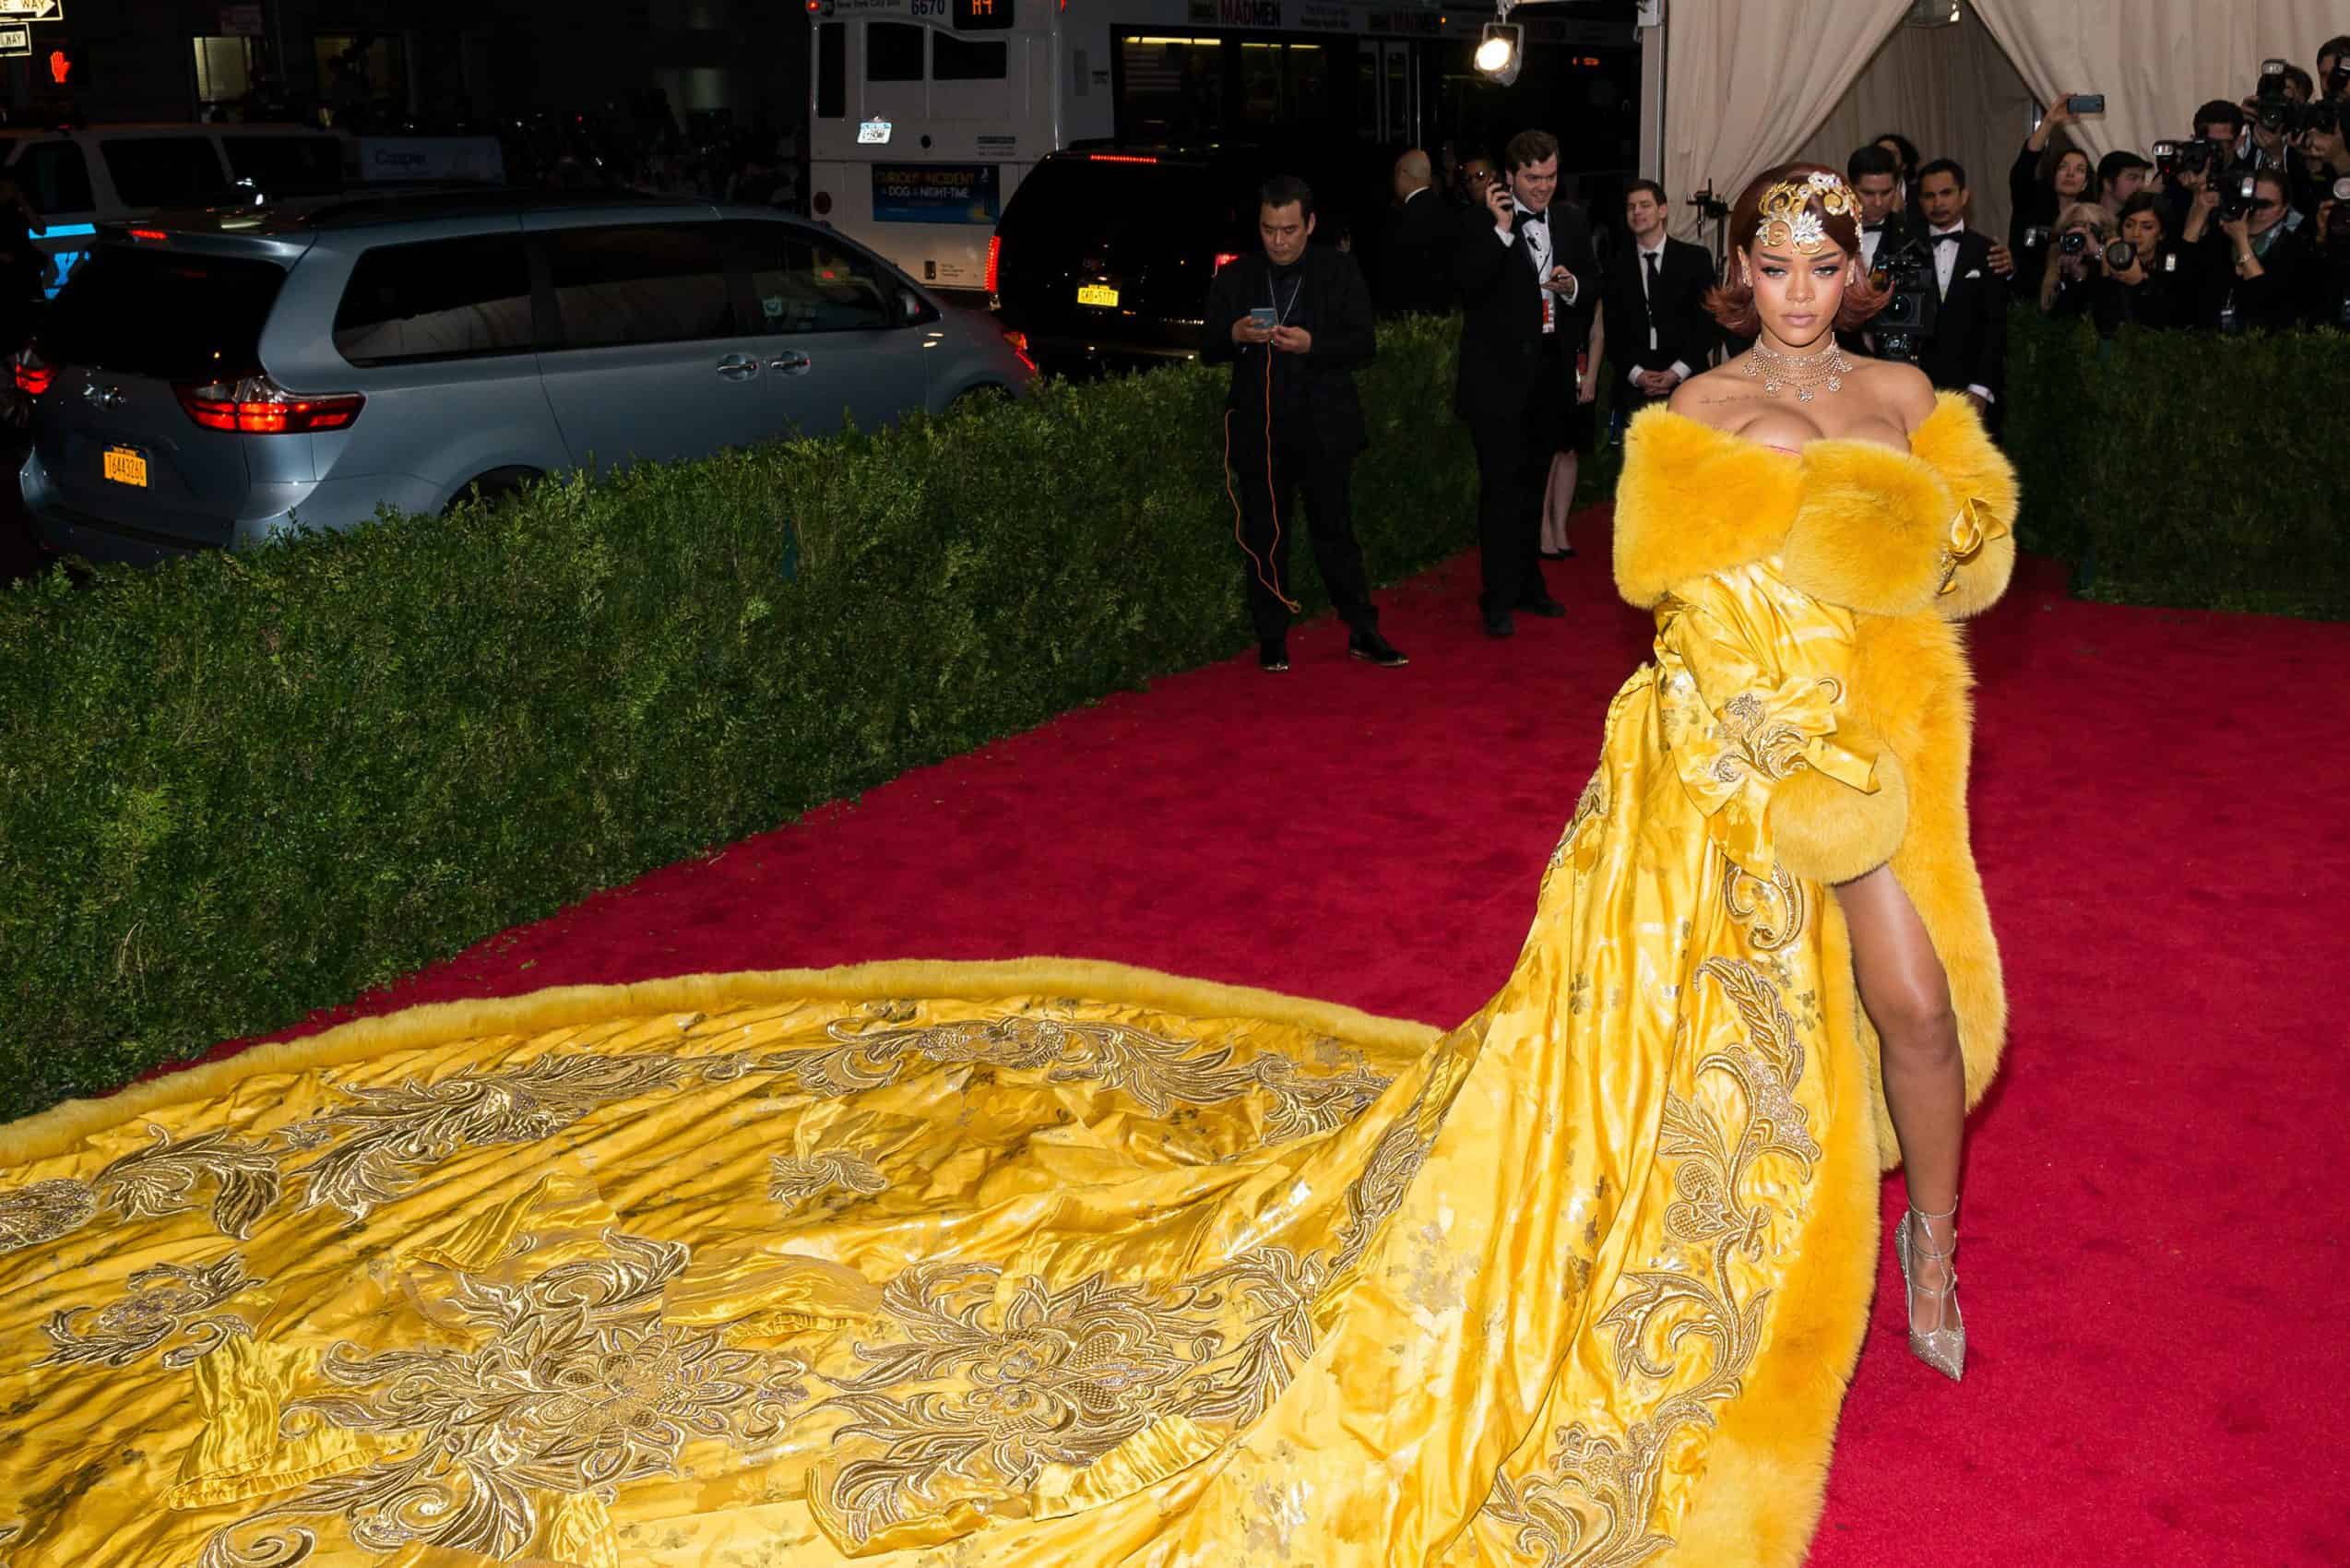 A Celebration Of Rihanna Slaying The Met Gala Red Carpet - Daily Front Row